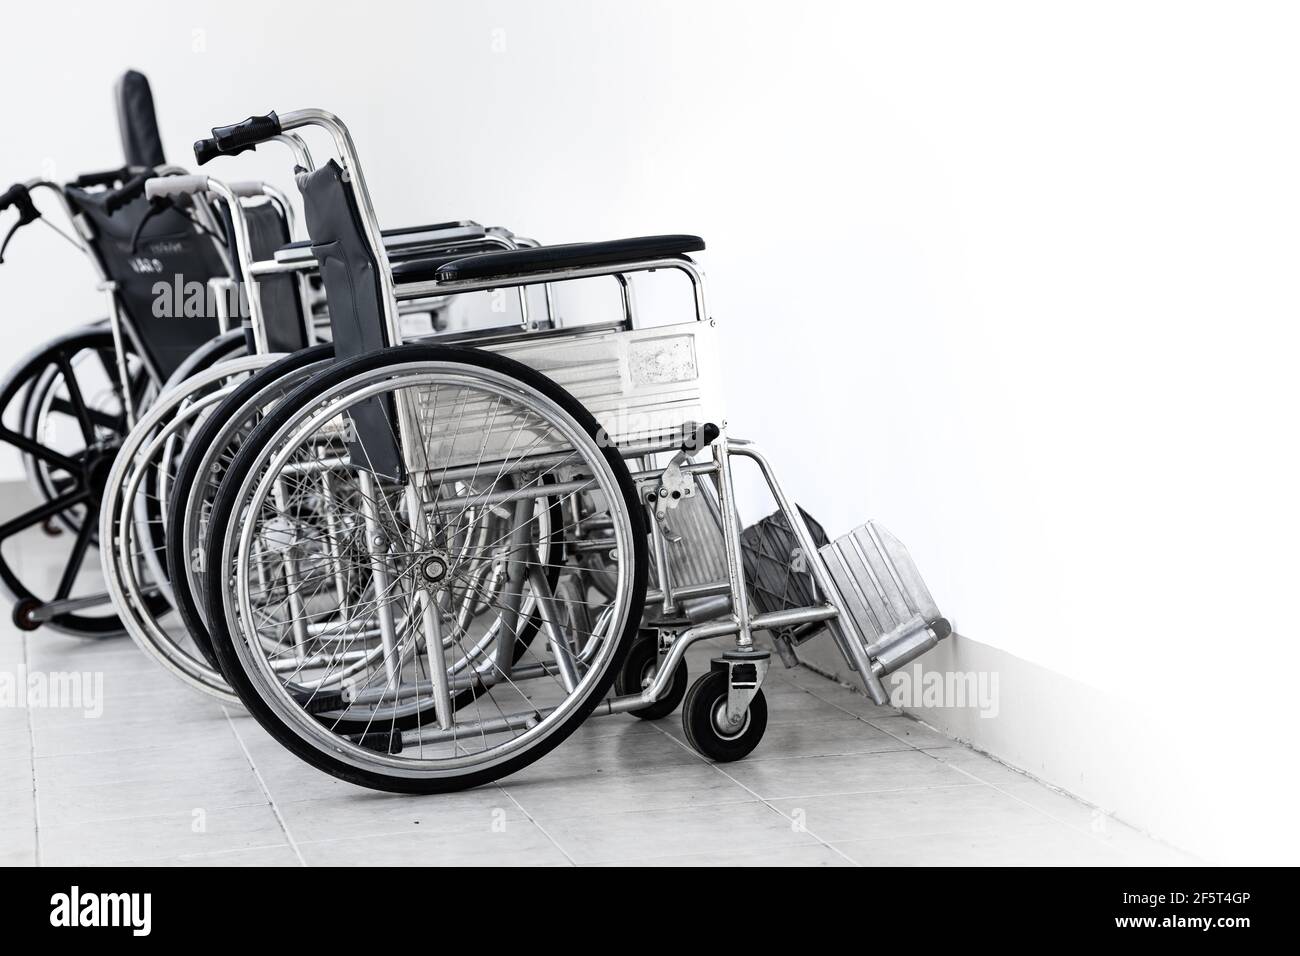 Wheelchair, a chair with wheels for disability people and hospital illness injury patient care. Stock Photo